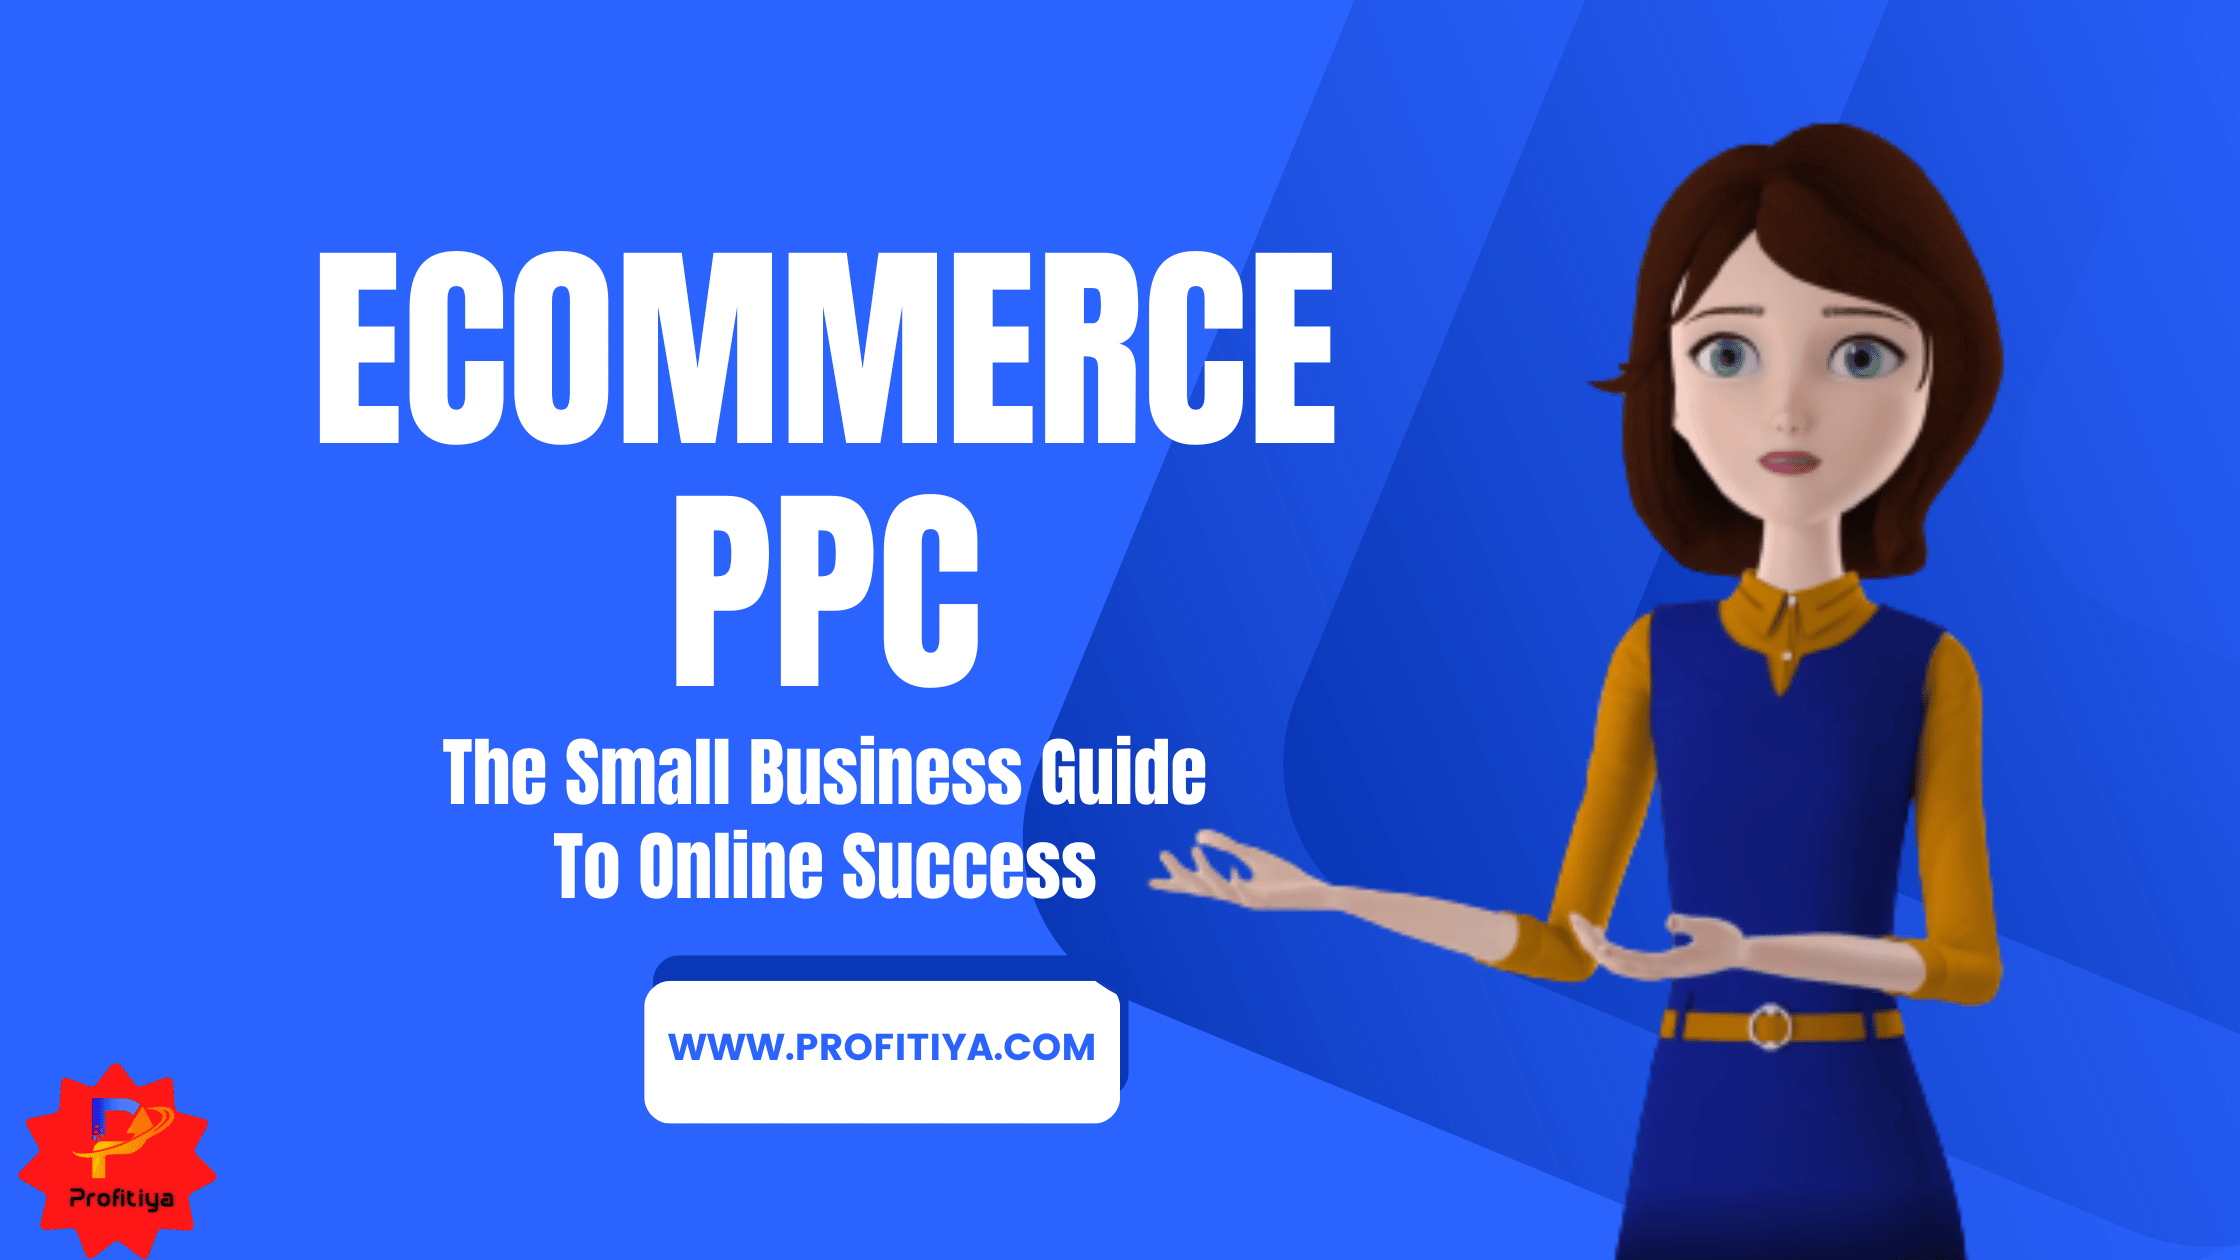 Ecommerce PPC – The Small Business Guide To Online Success